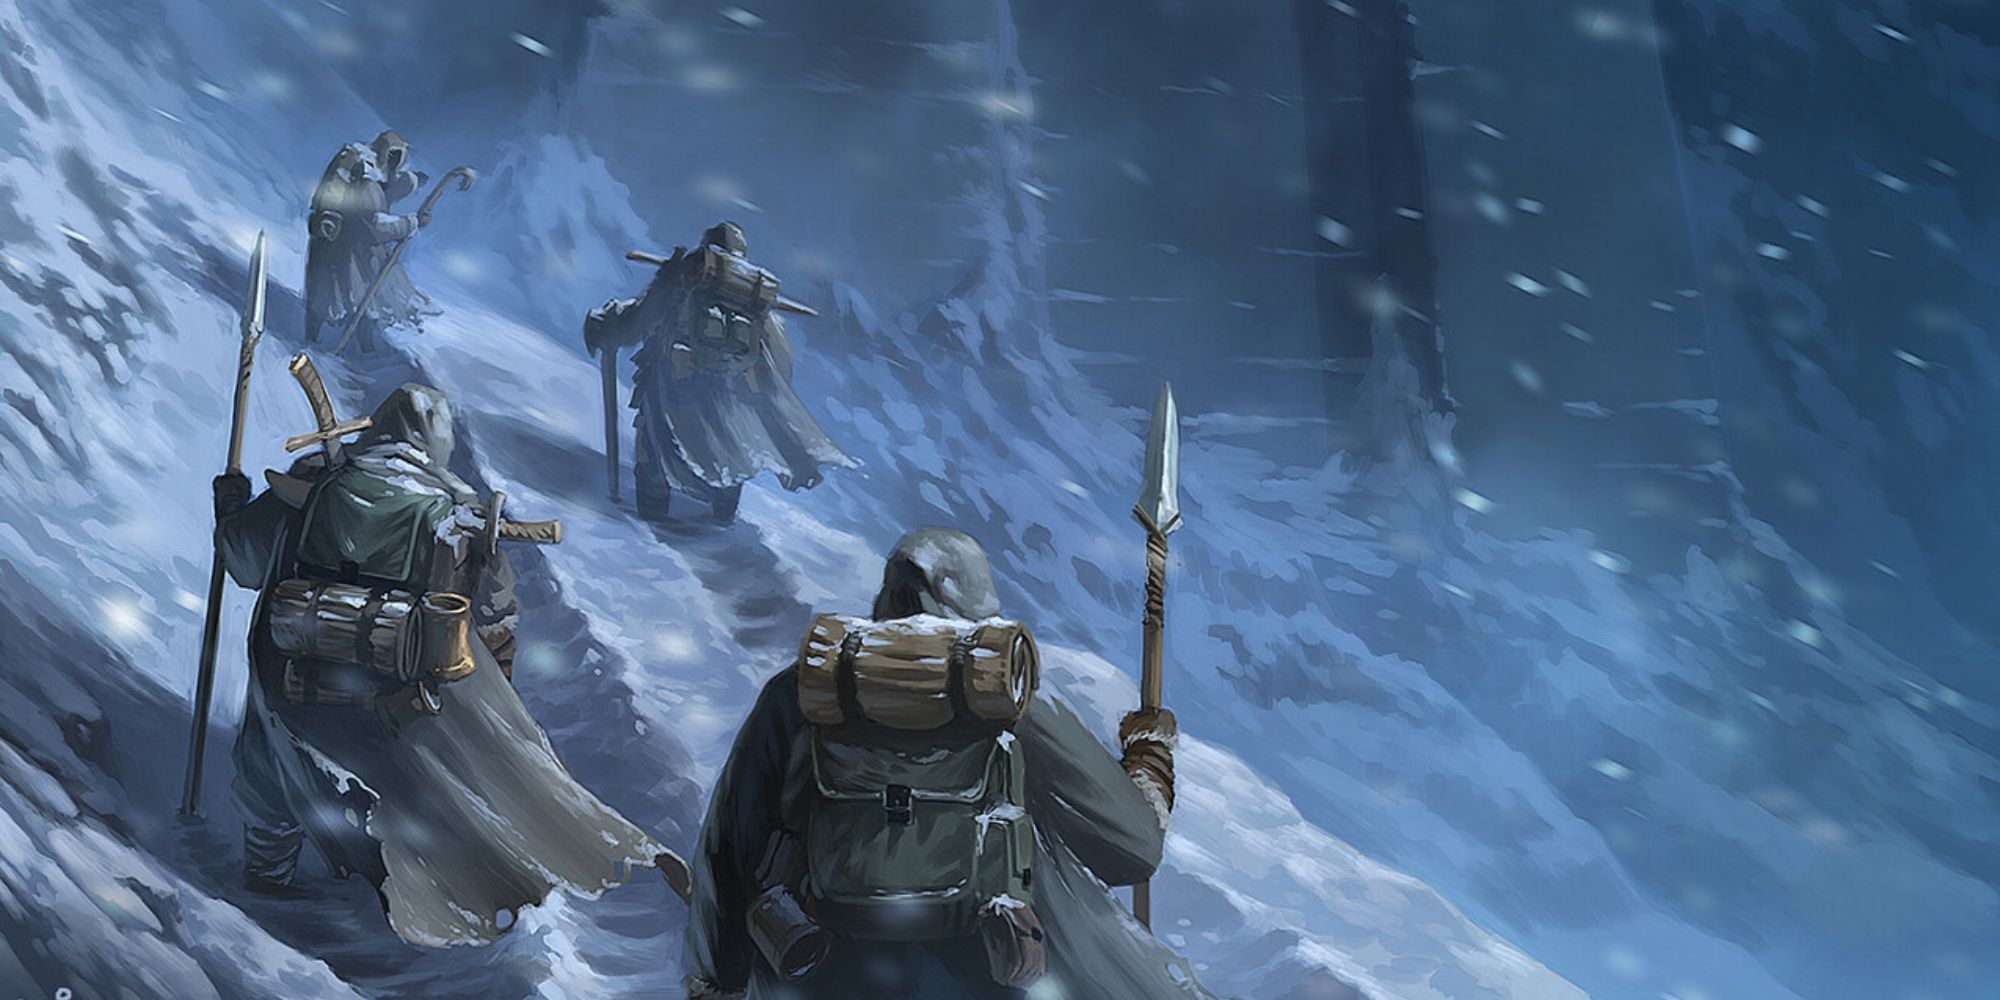 Dungeons & Dragons - Adventurers in a snow storm approaching Xardoroks Fortress